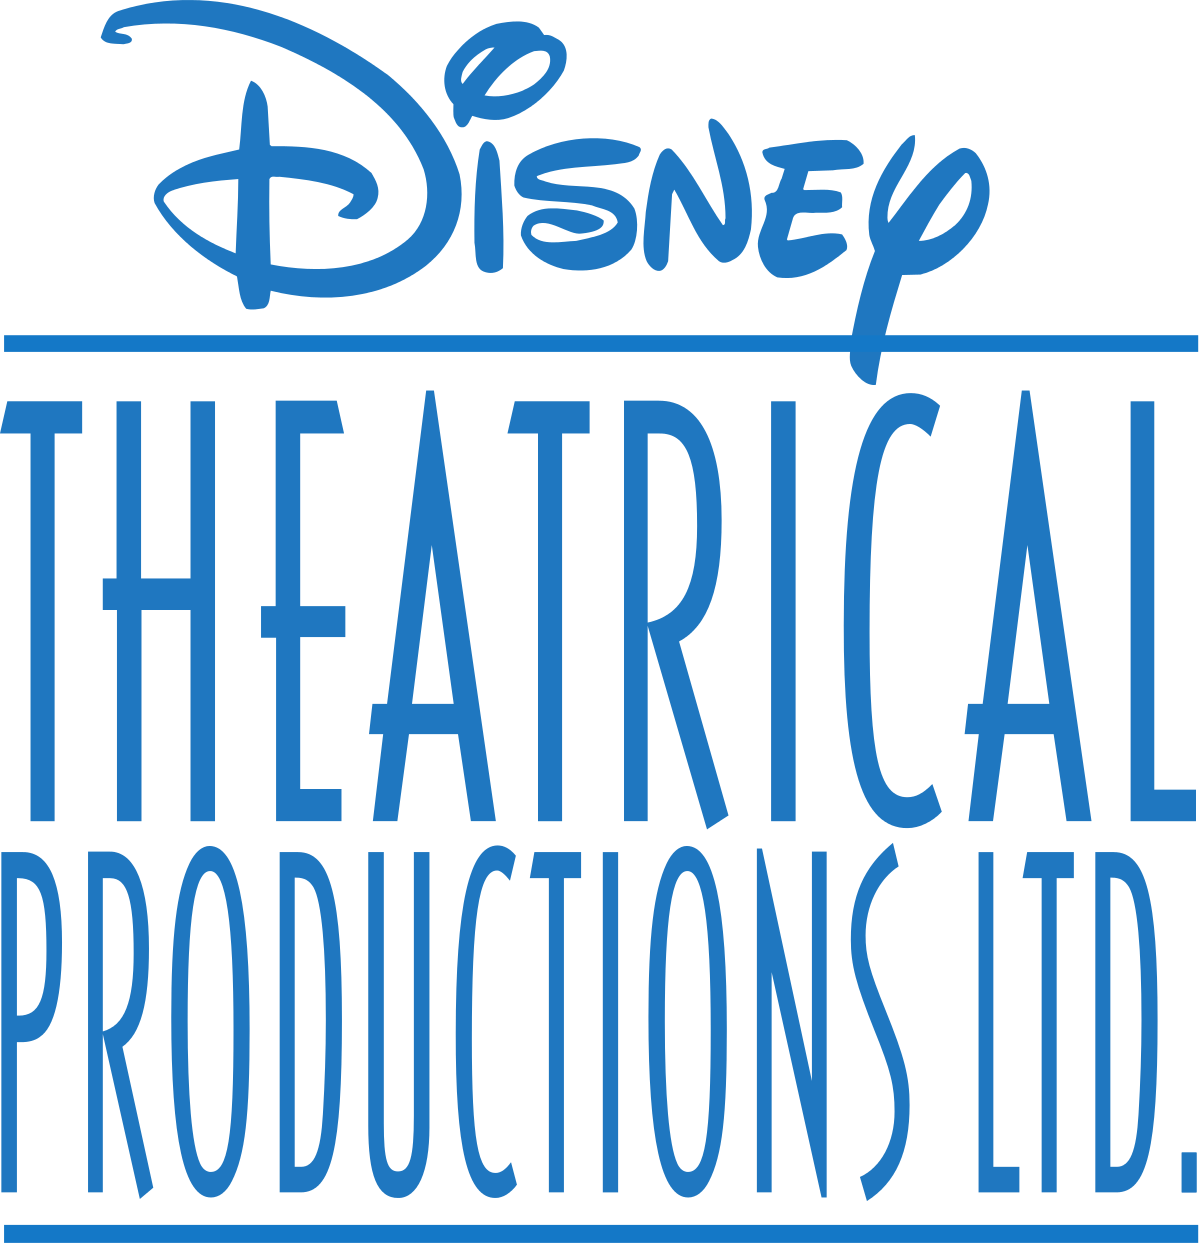 Disney_Theatrical_Productions_logo.svg.png